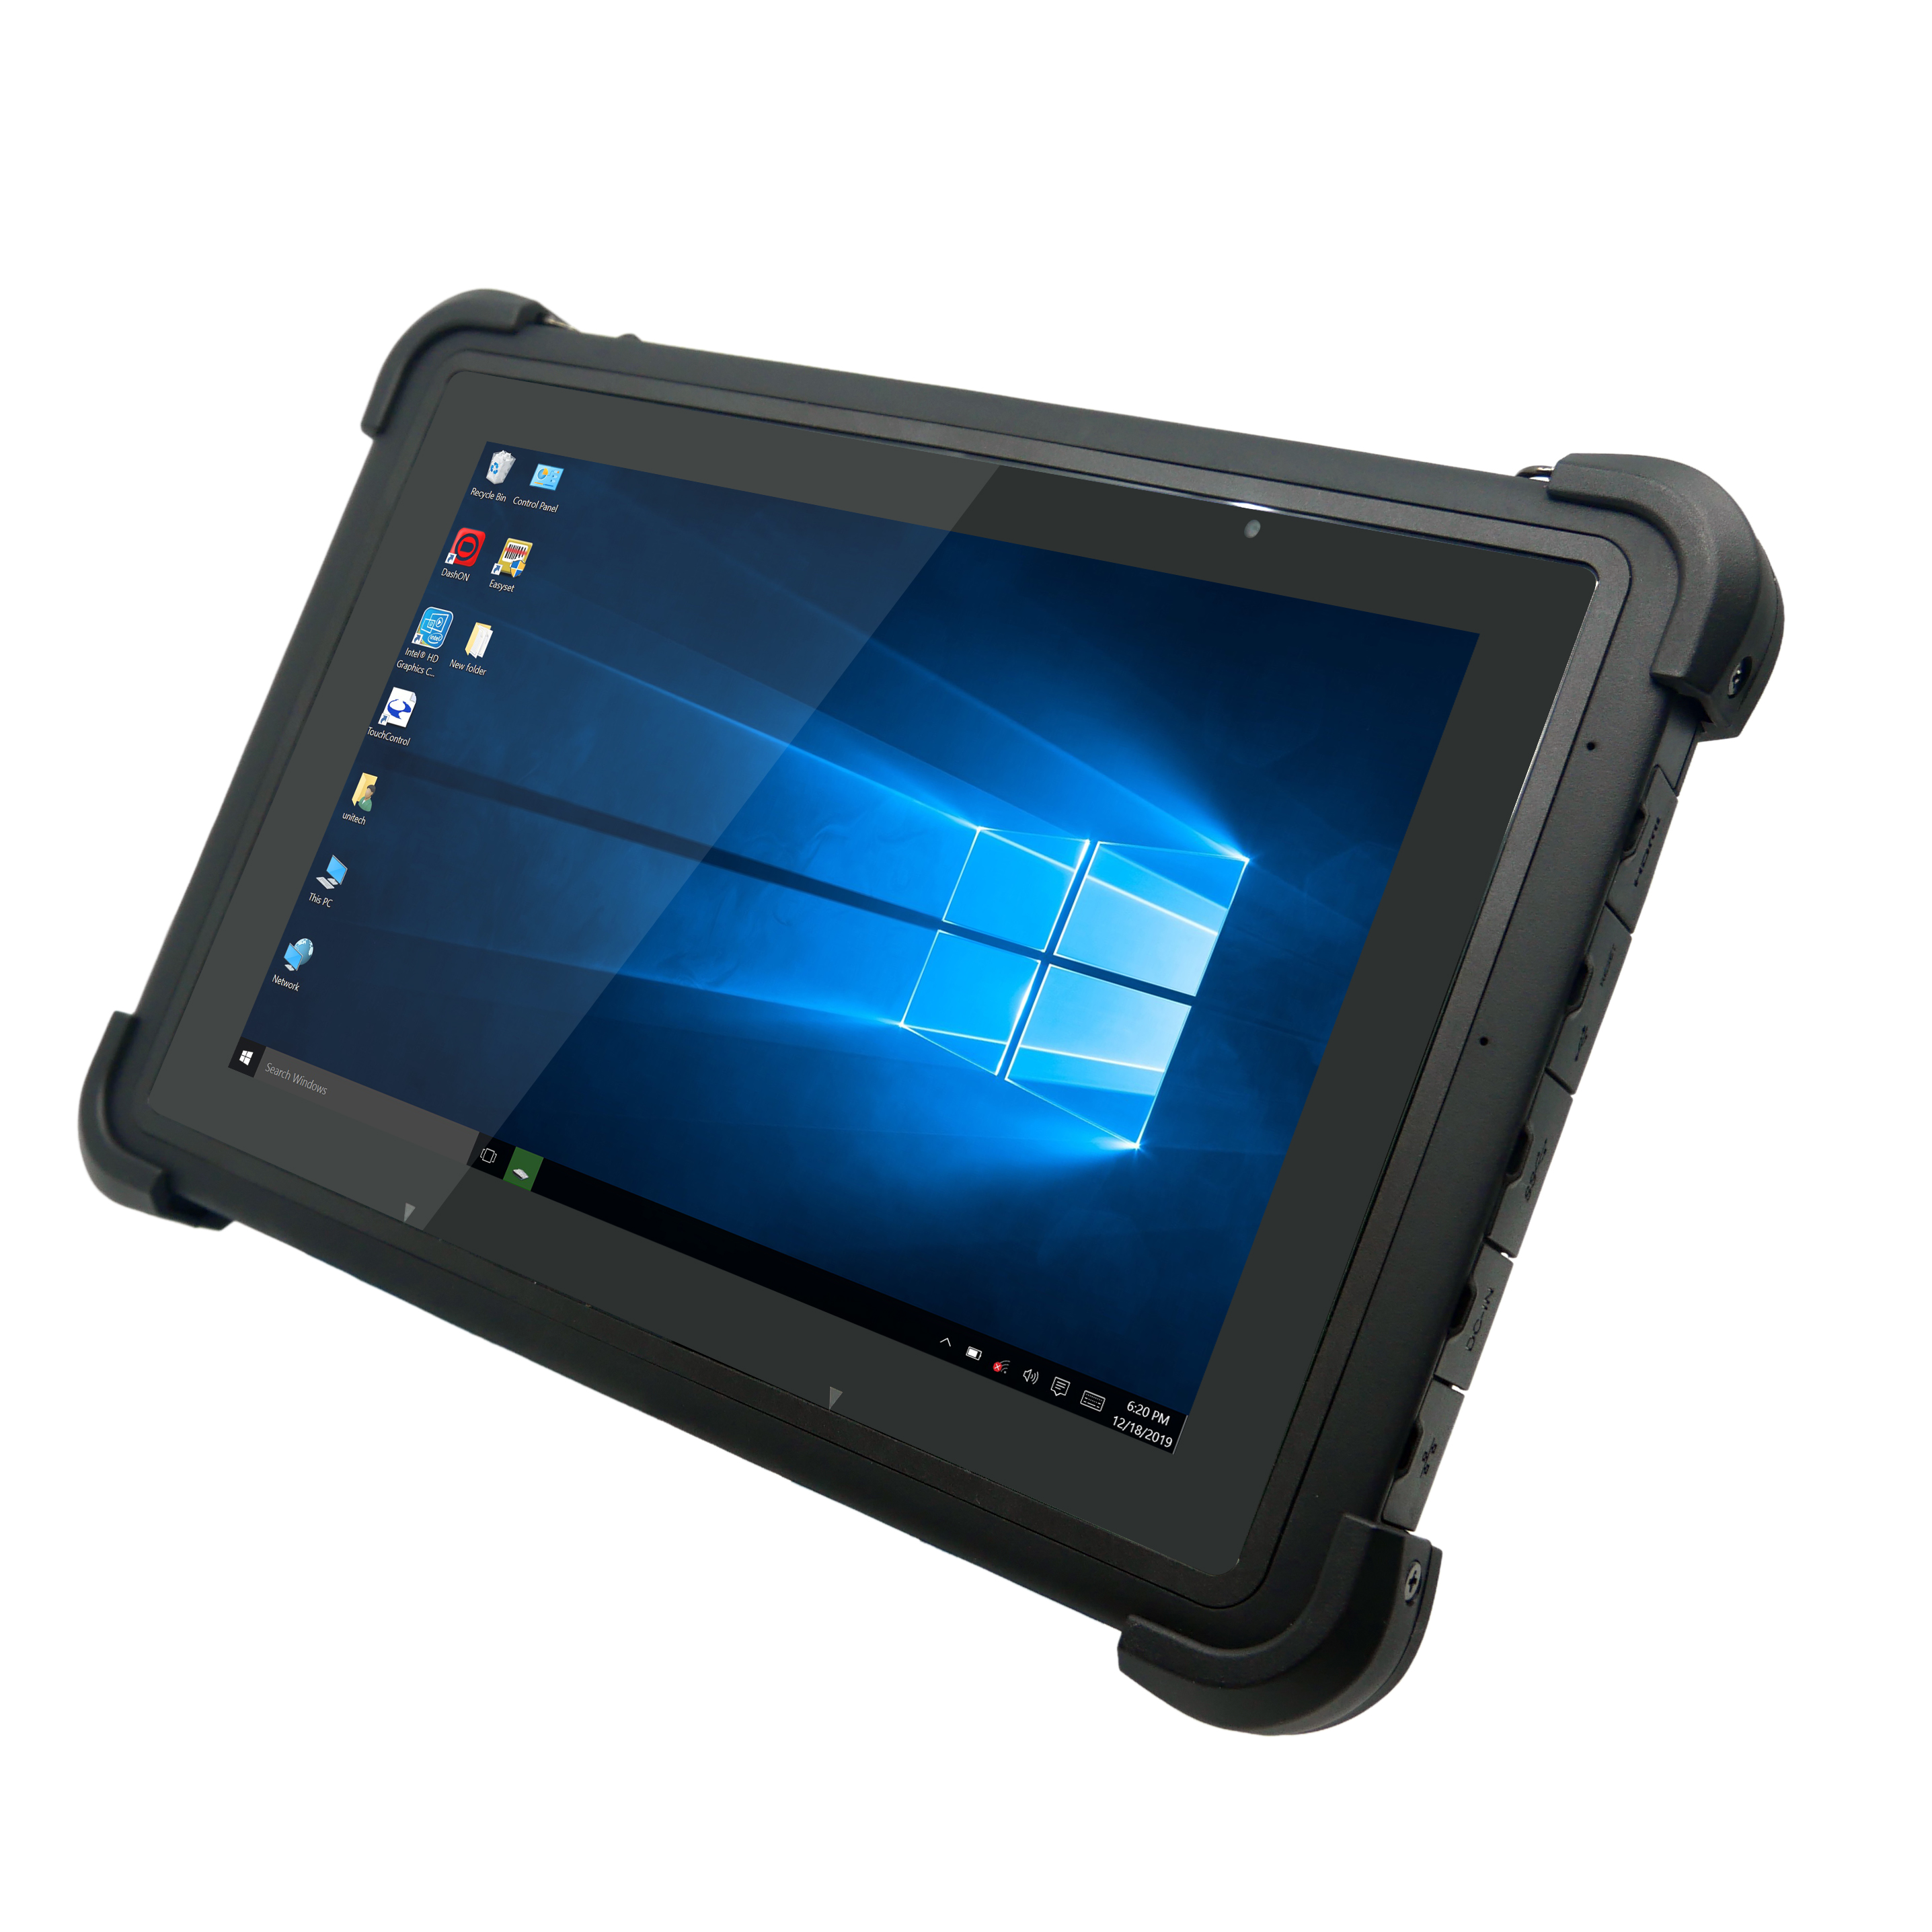 Unitech TB162 Tablet [10.1", No Scanner with Windows 10] TB162-0TL2UMNG